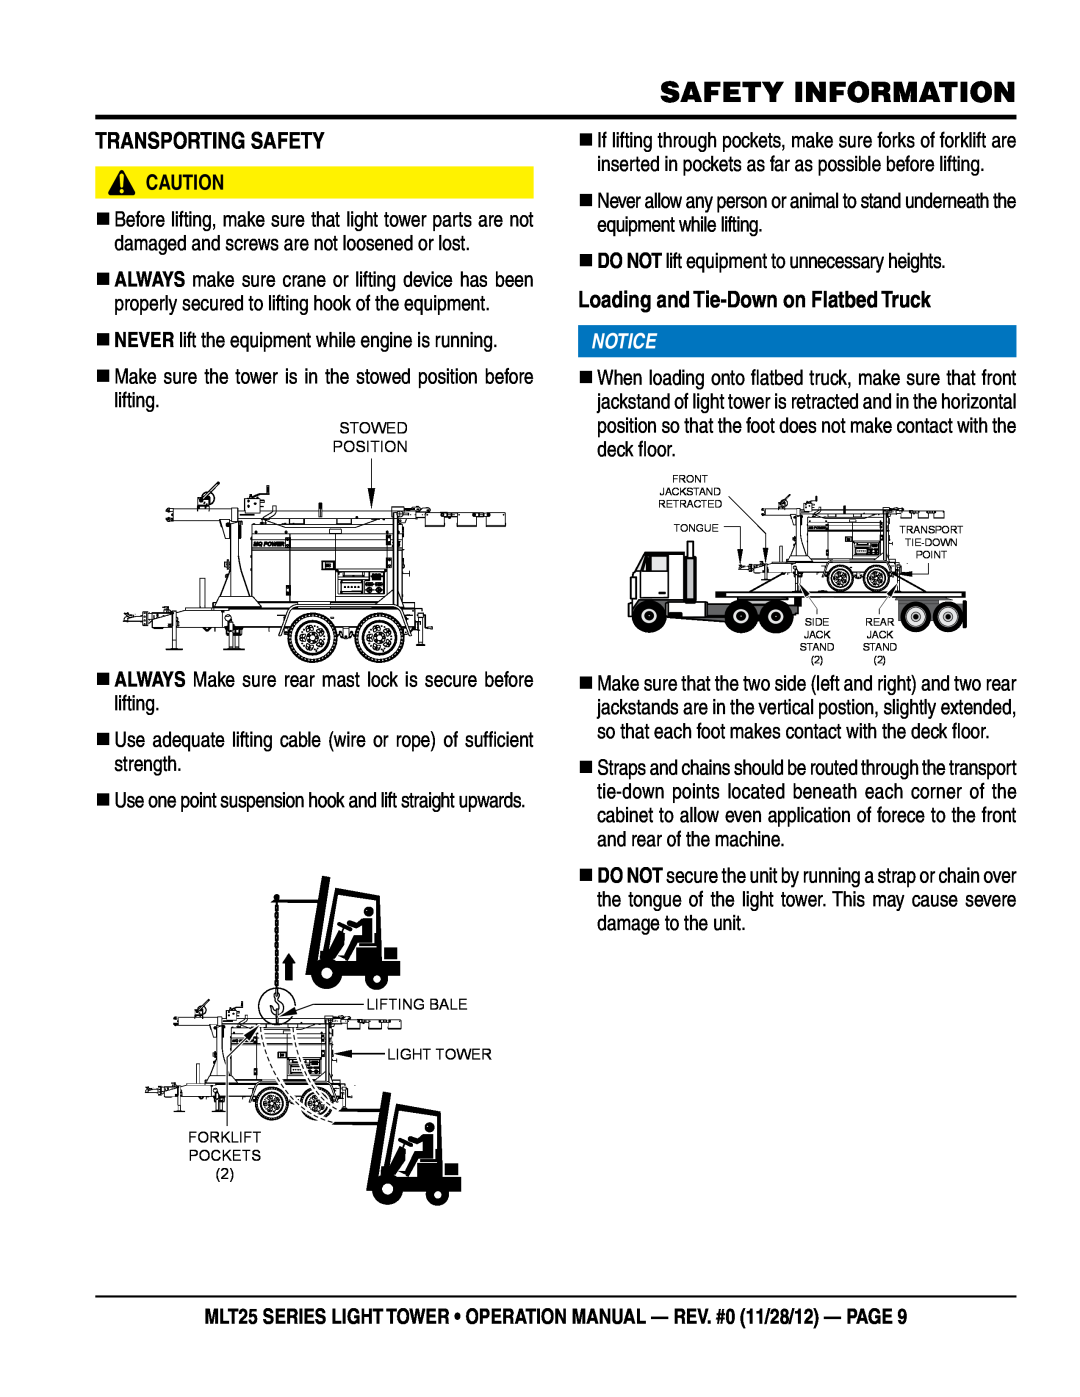 Multiquip MLT25 operation manual TRanspORTIng saFeTY, Loading and Tie-Down on Flatbed Truck, Safety Information 